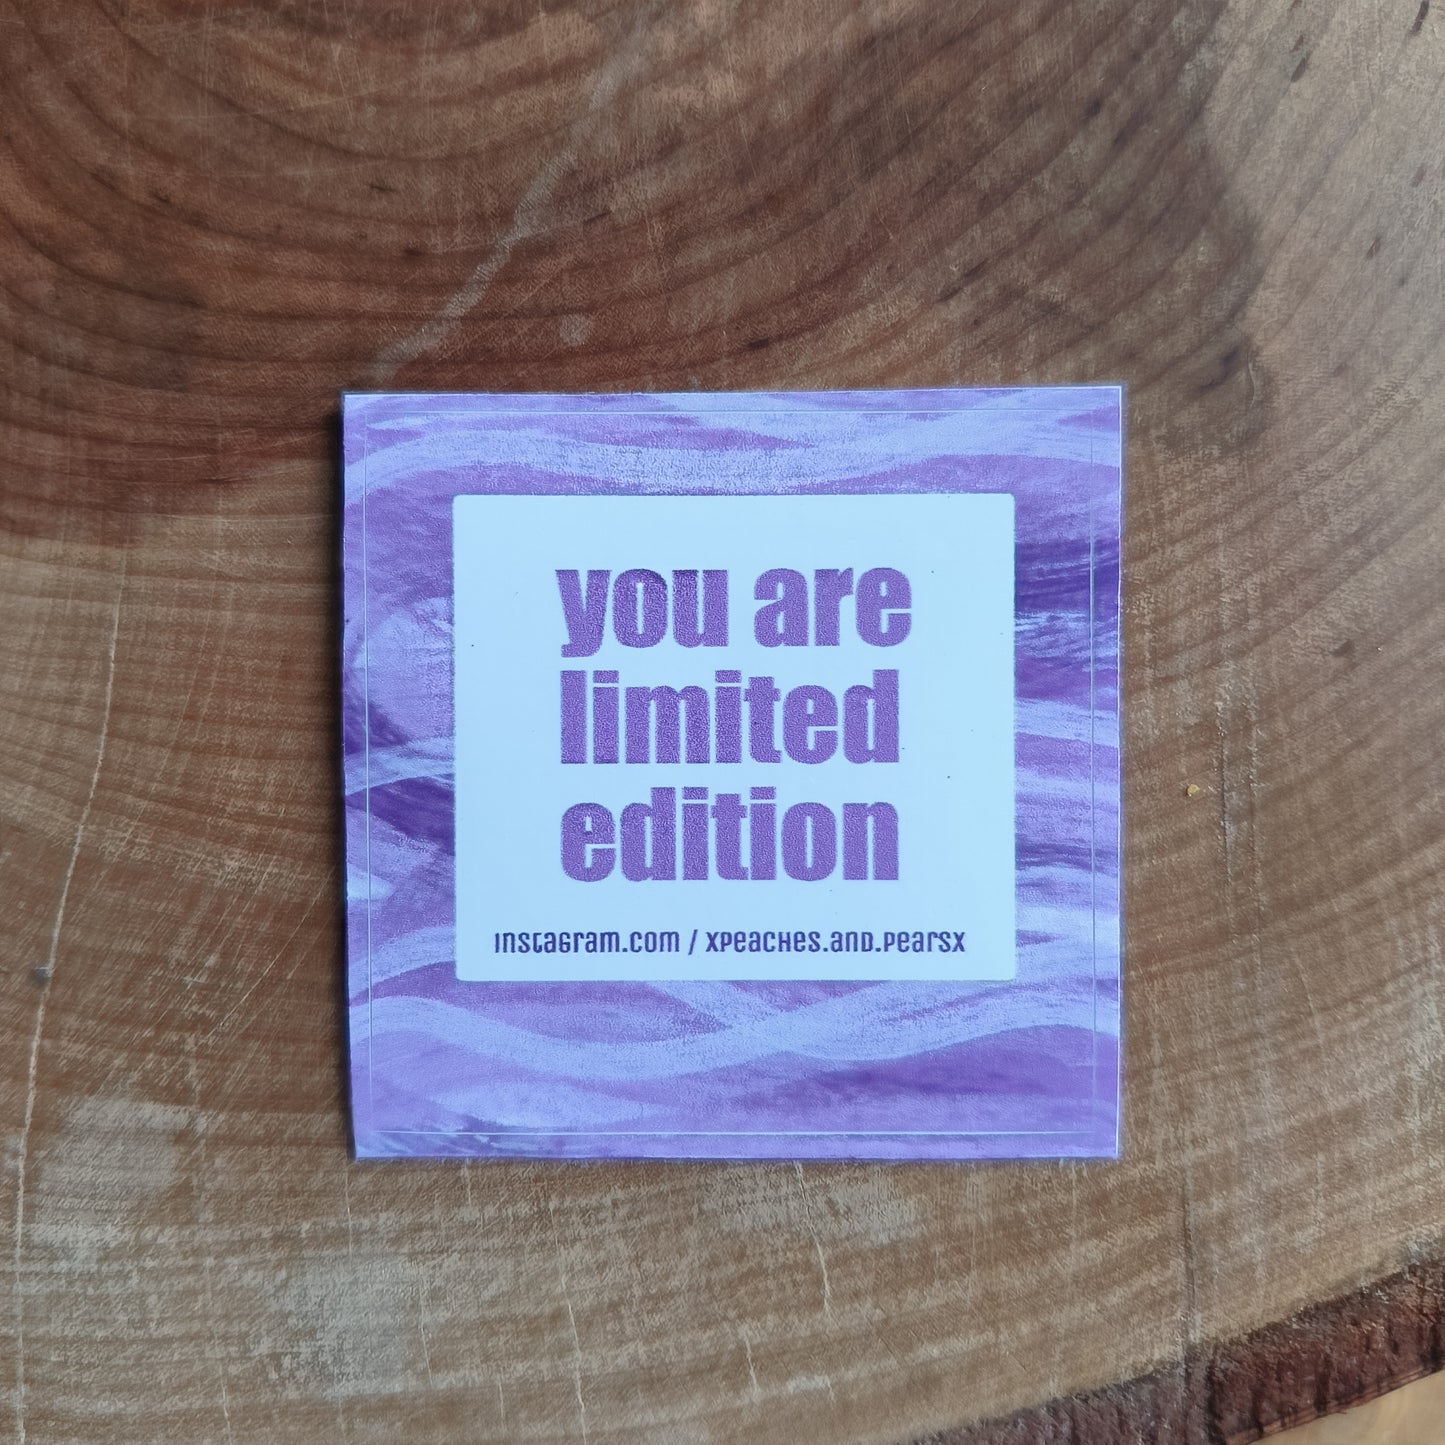 Sticker "you are limited edition"